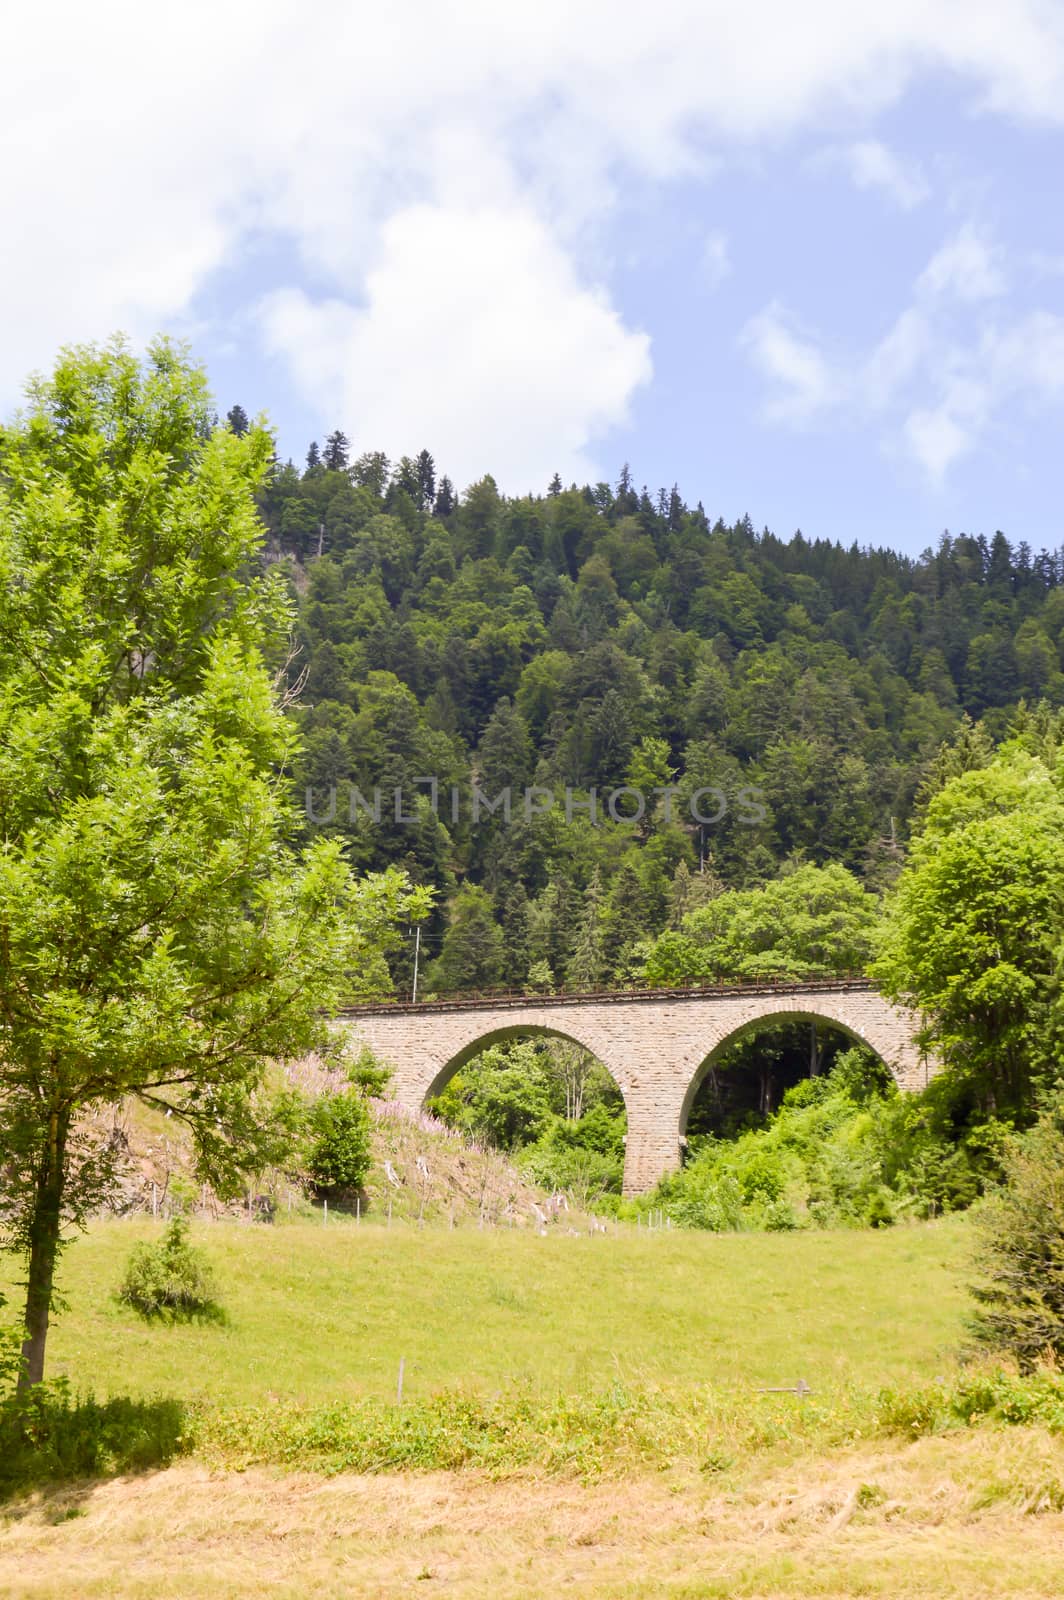 Railway bridge in stone with arches  by Philou1000